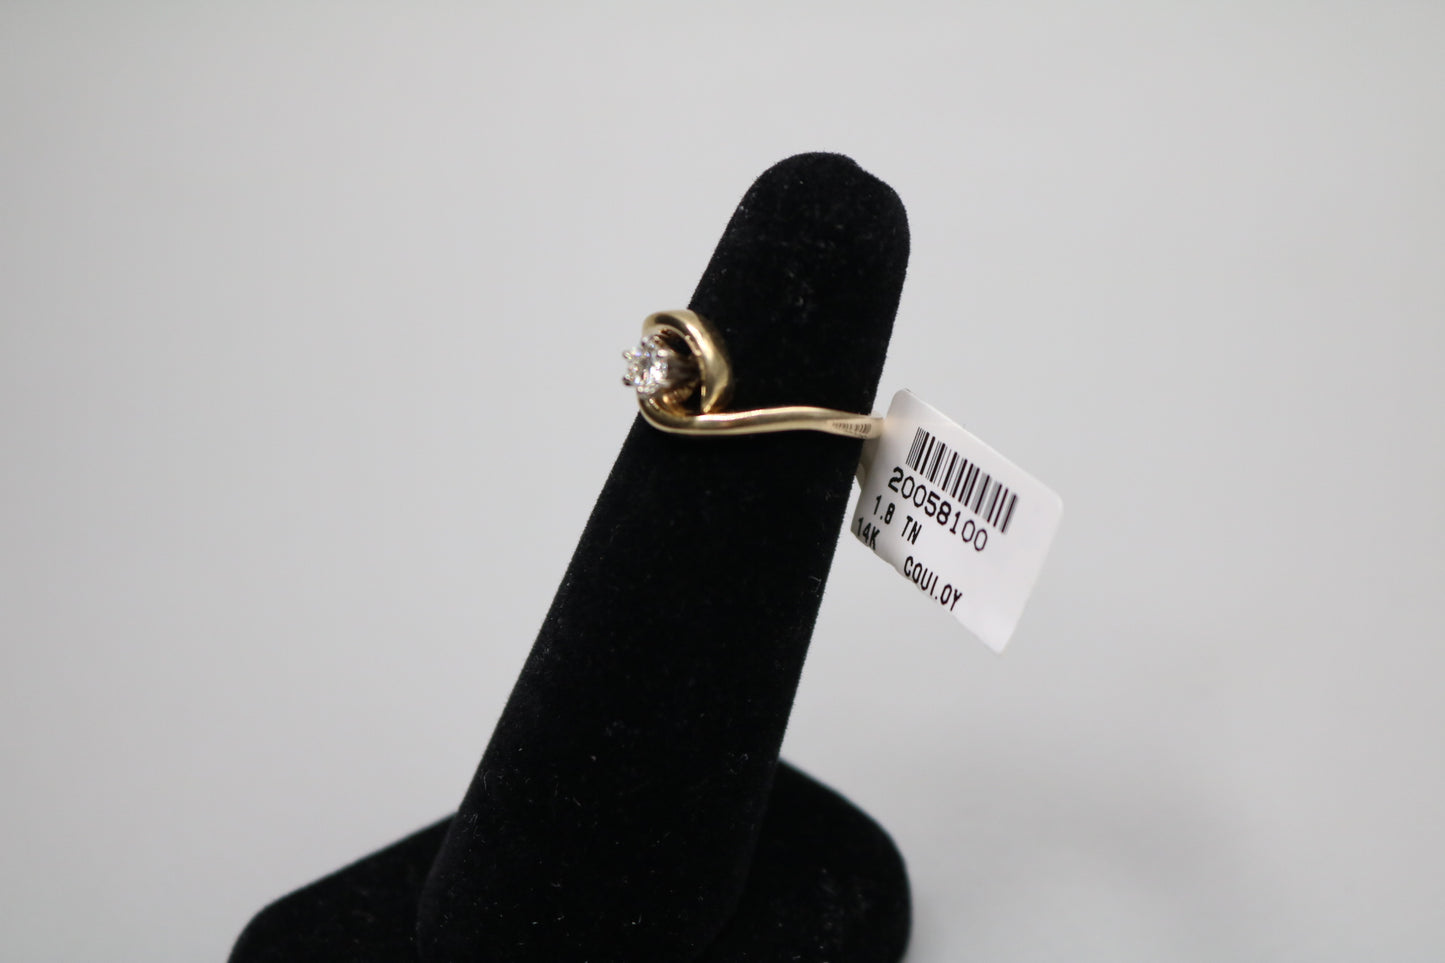 14K Yellow Gold Diamond Solitaire Bypass Ring (0.18 CTW) (Size 5 1/2)